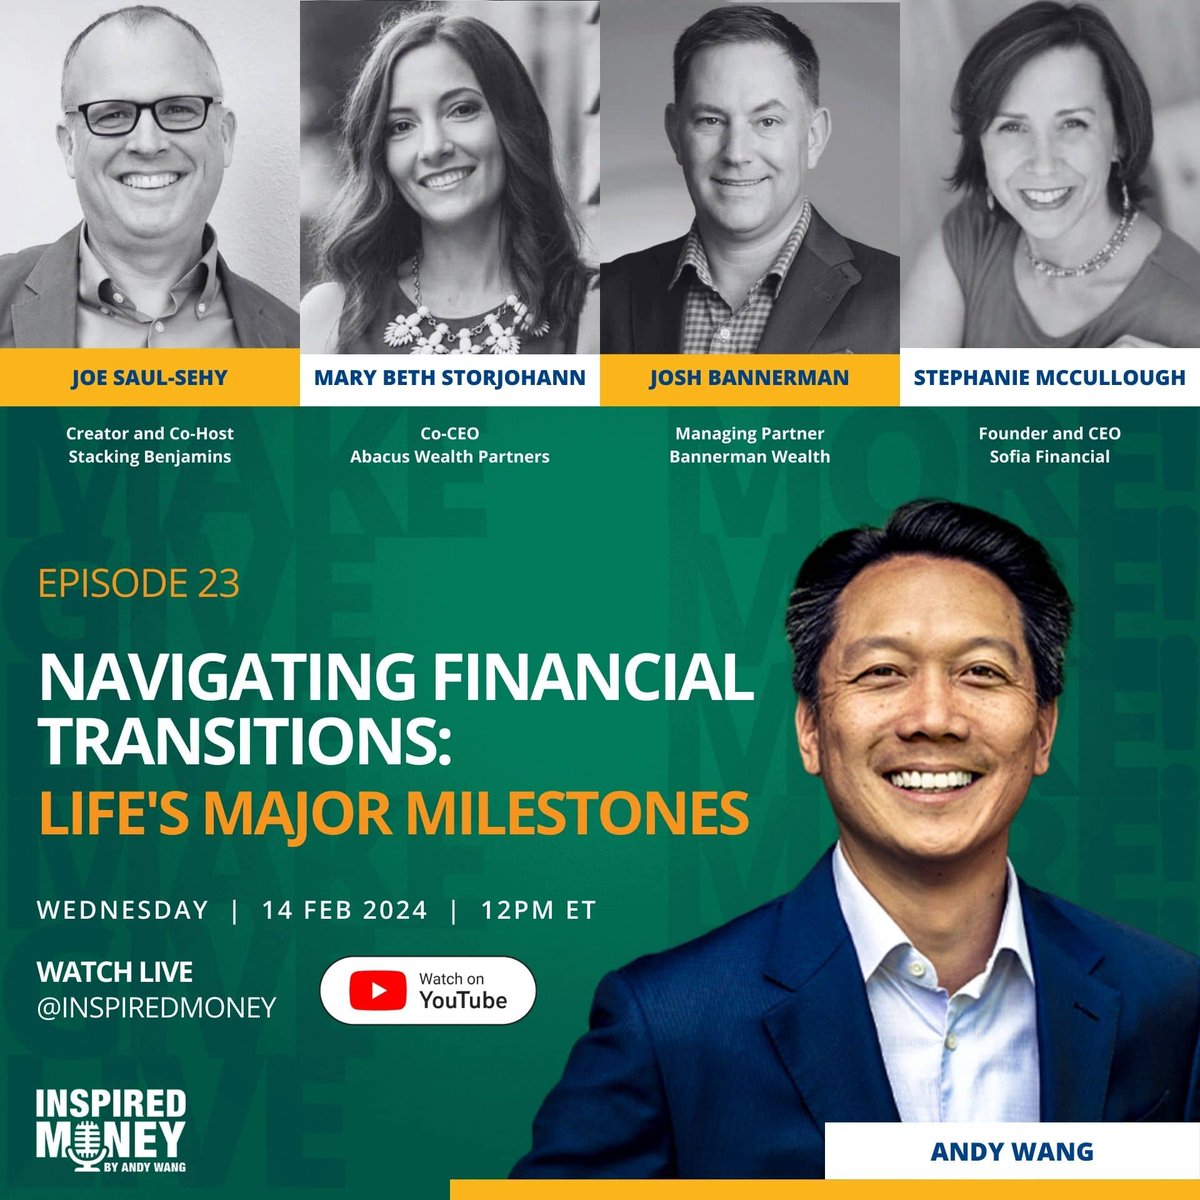 Join us for a Valentine's Day livestream at noon today. Our topic: Navigating Financial Transitions: Life's Major Milestones Esteemed guest panelists: @marybstorj, @sofiafinancial, @AverageJoeMoney, and @joshbannerman youtube.com/watch?v=lCkdKy…